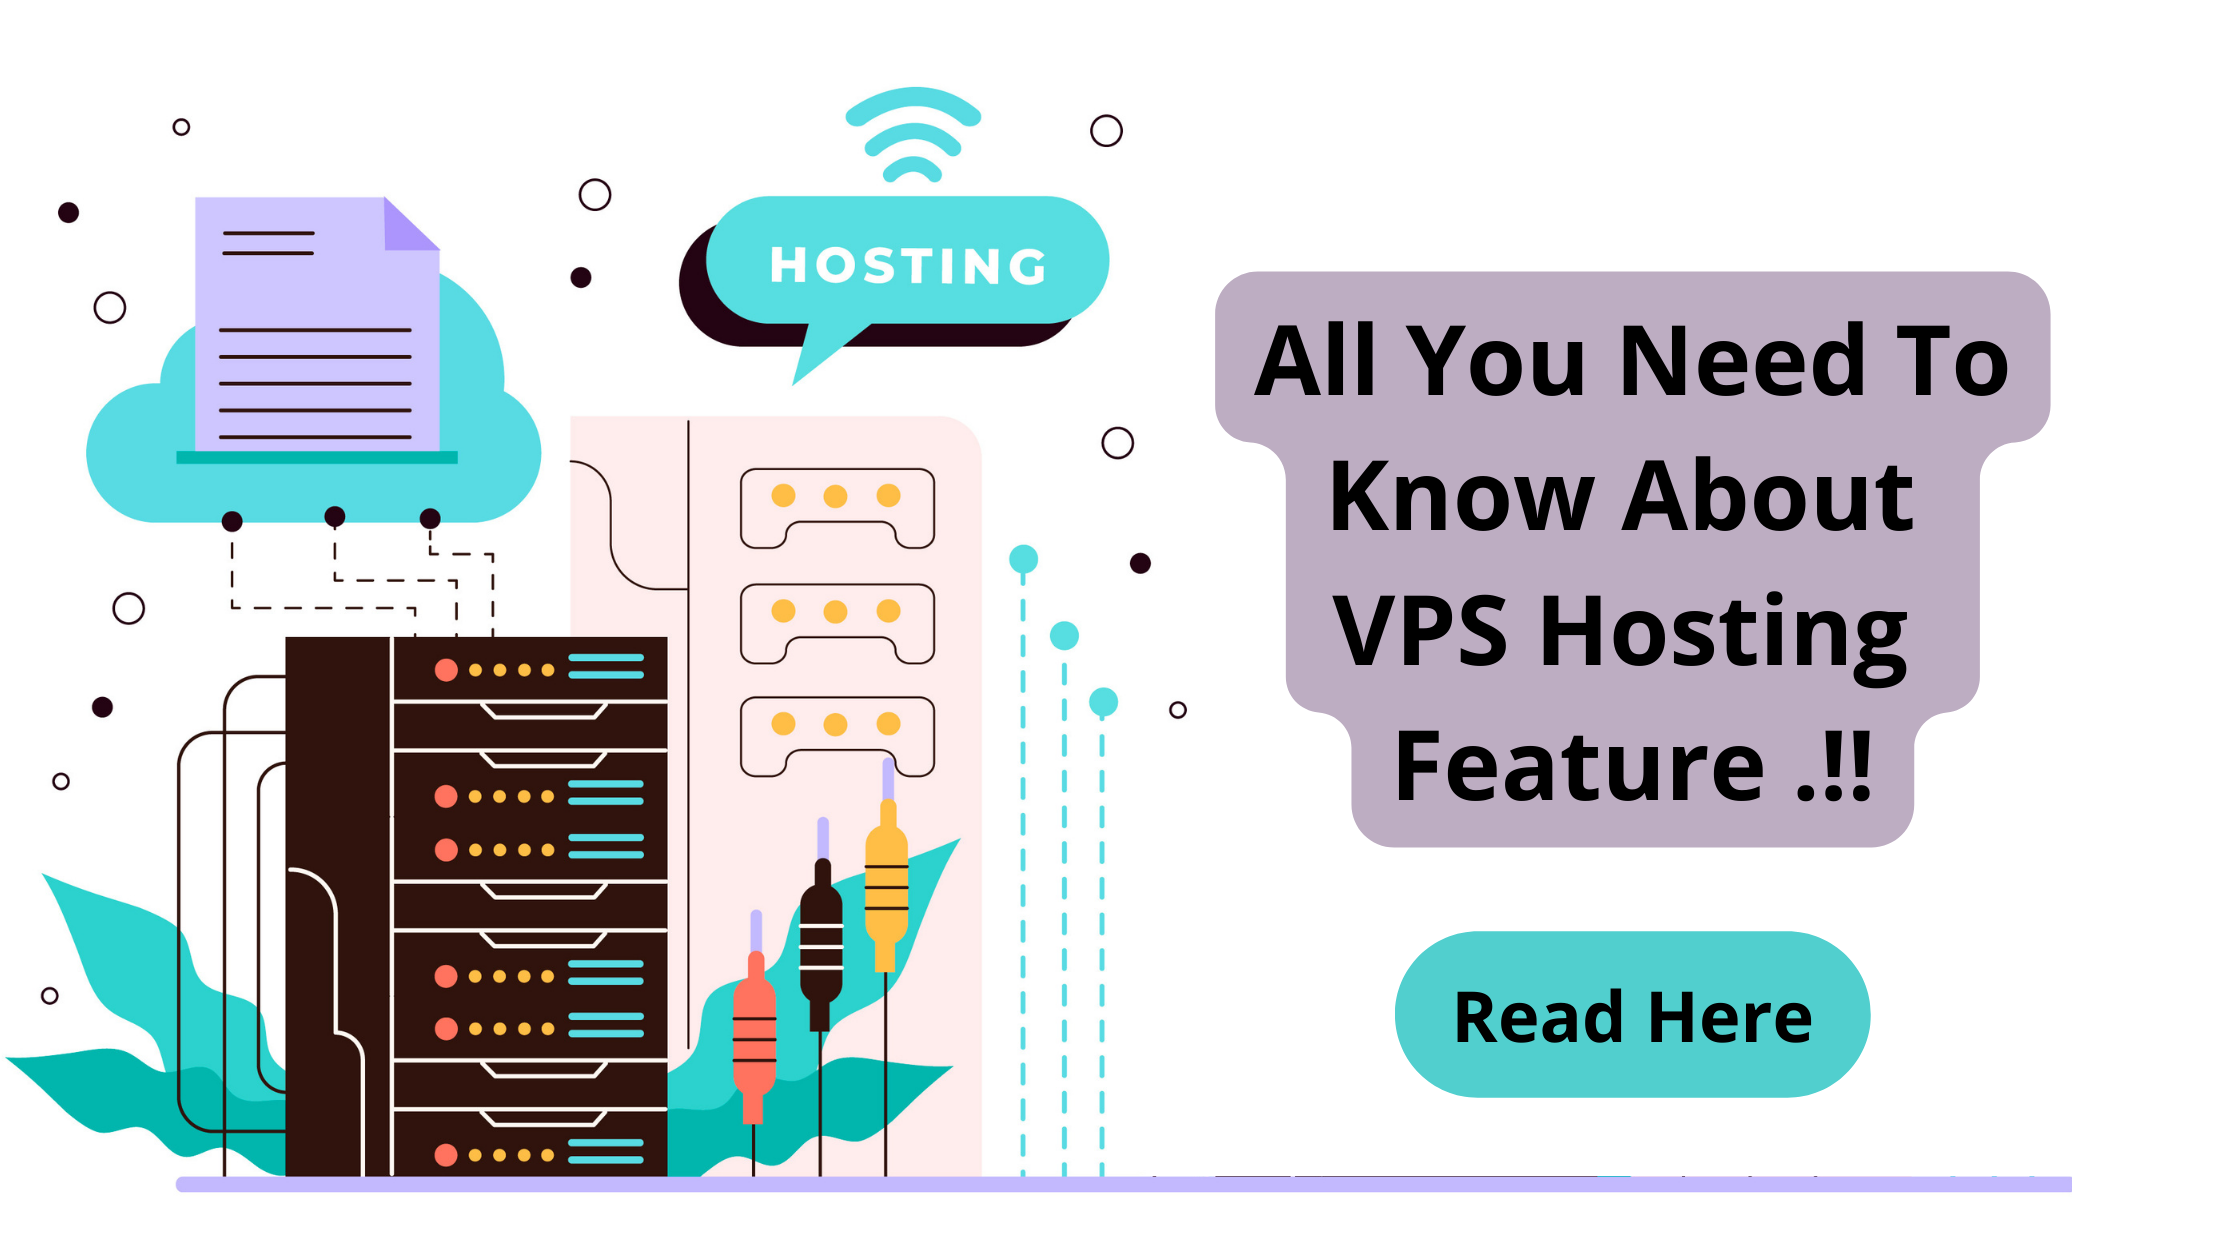 All You Need To Know About VPS Hosting & Its Top 6 Features